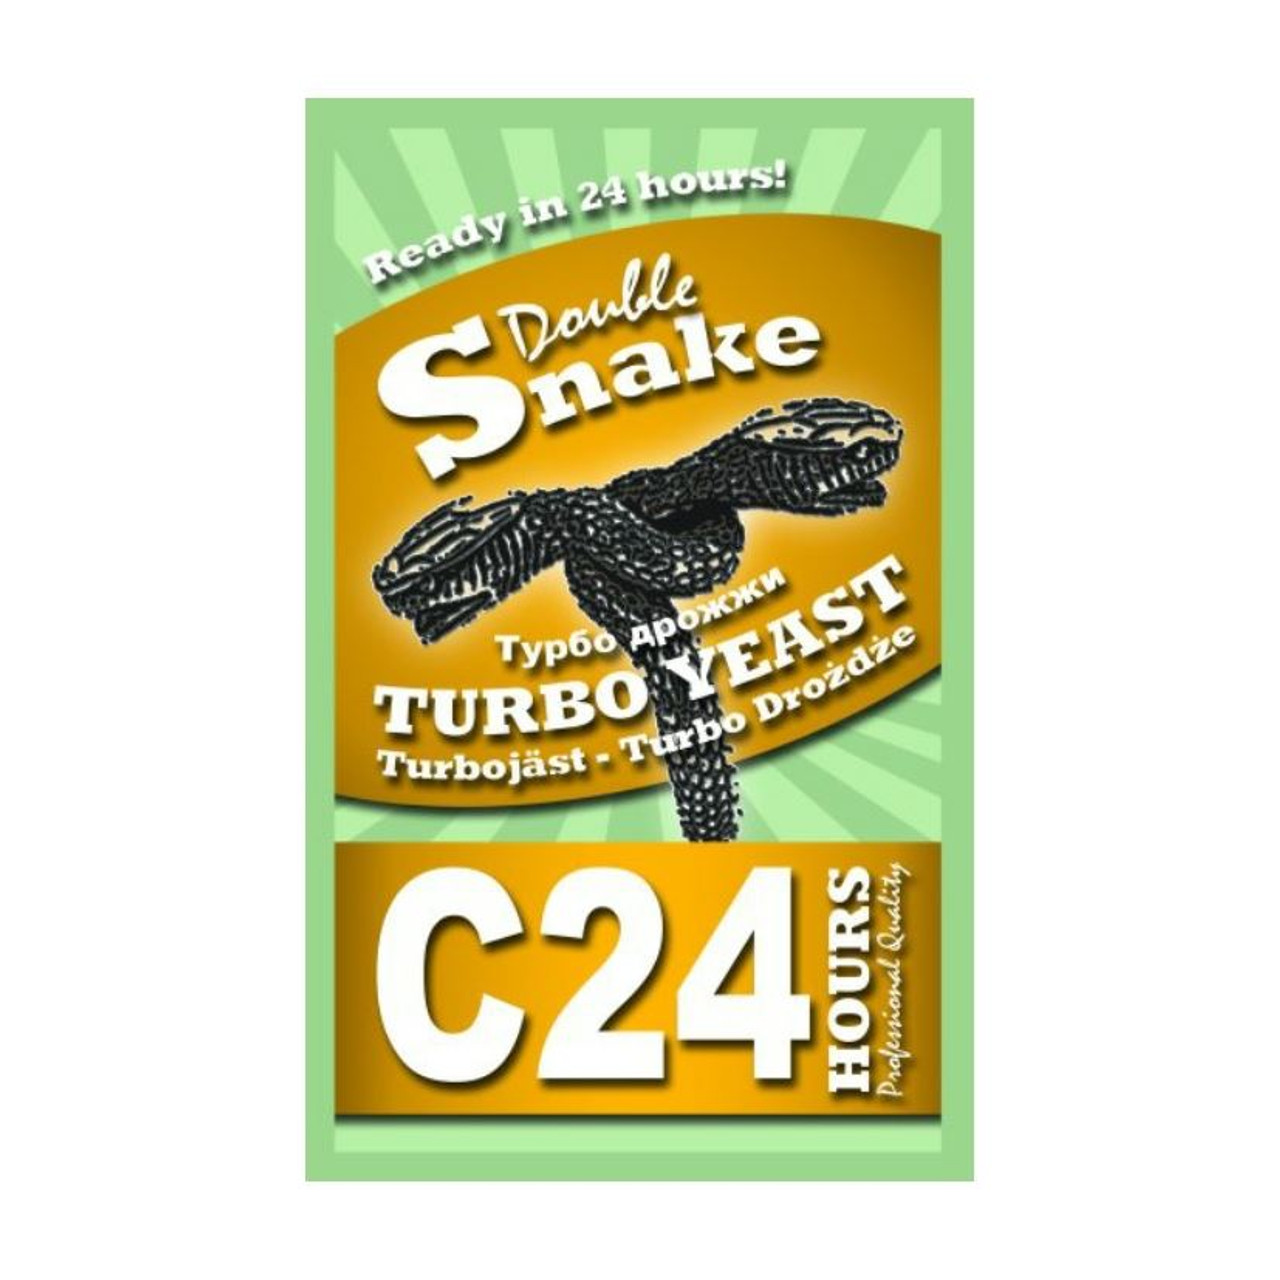 Double Snake C24 24 hour Turbo Yeast 25L